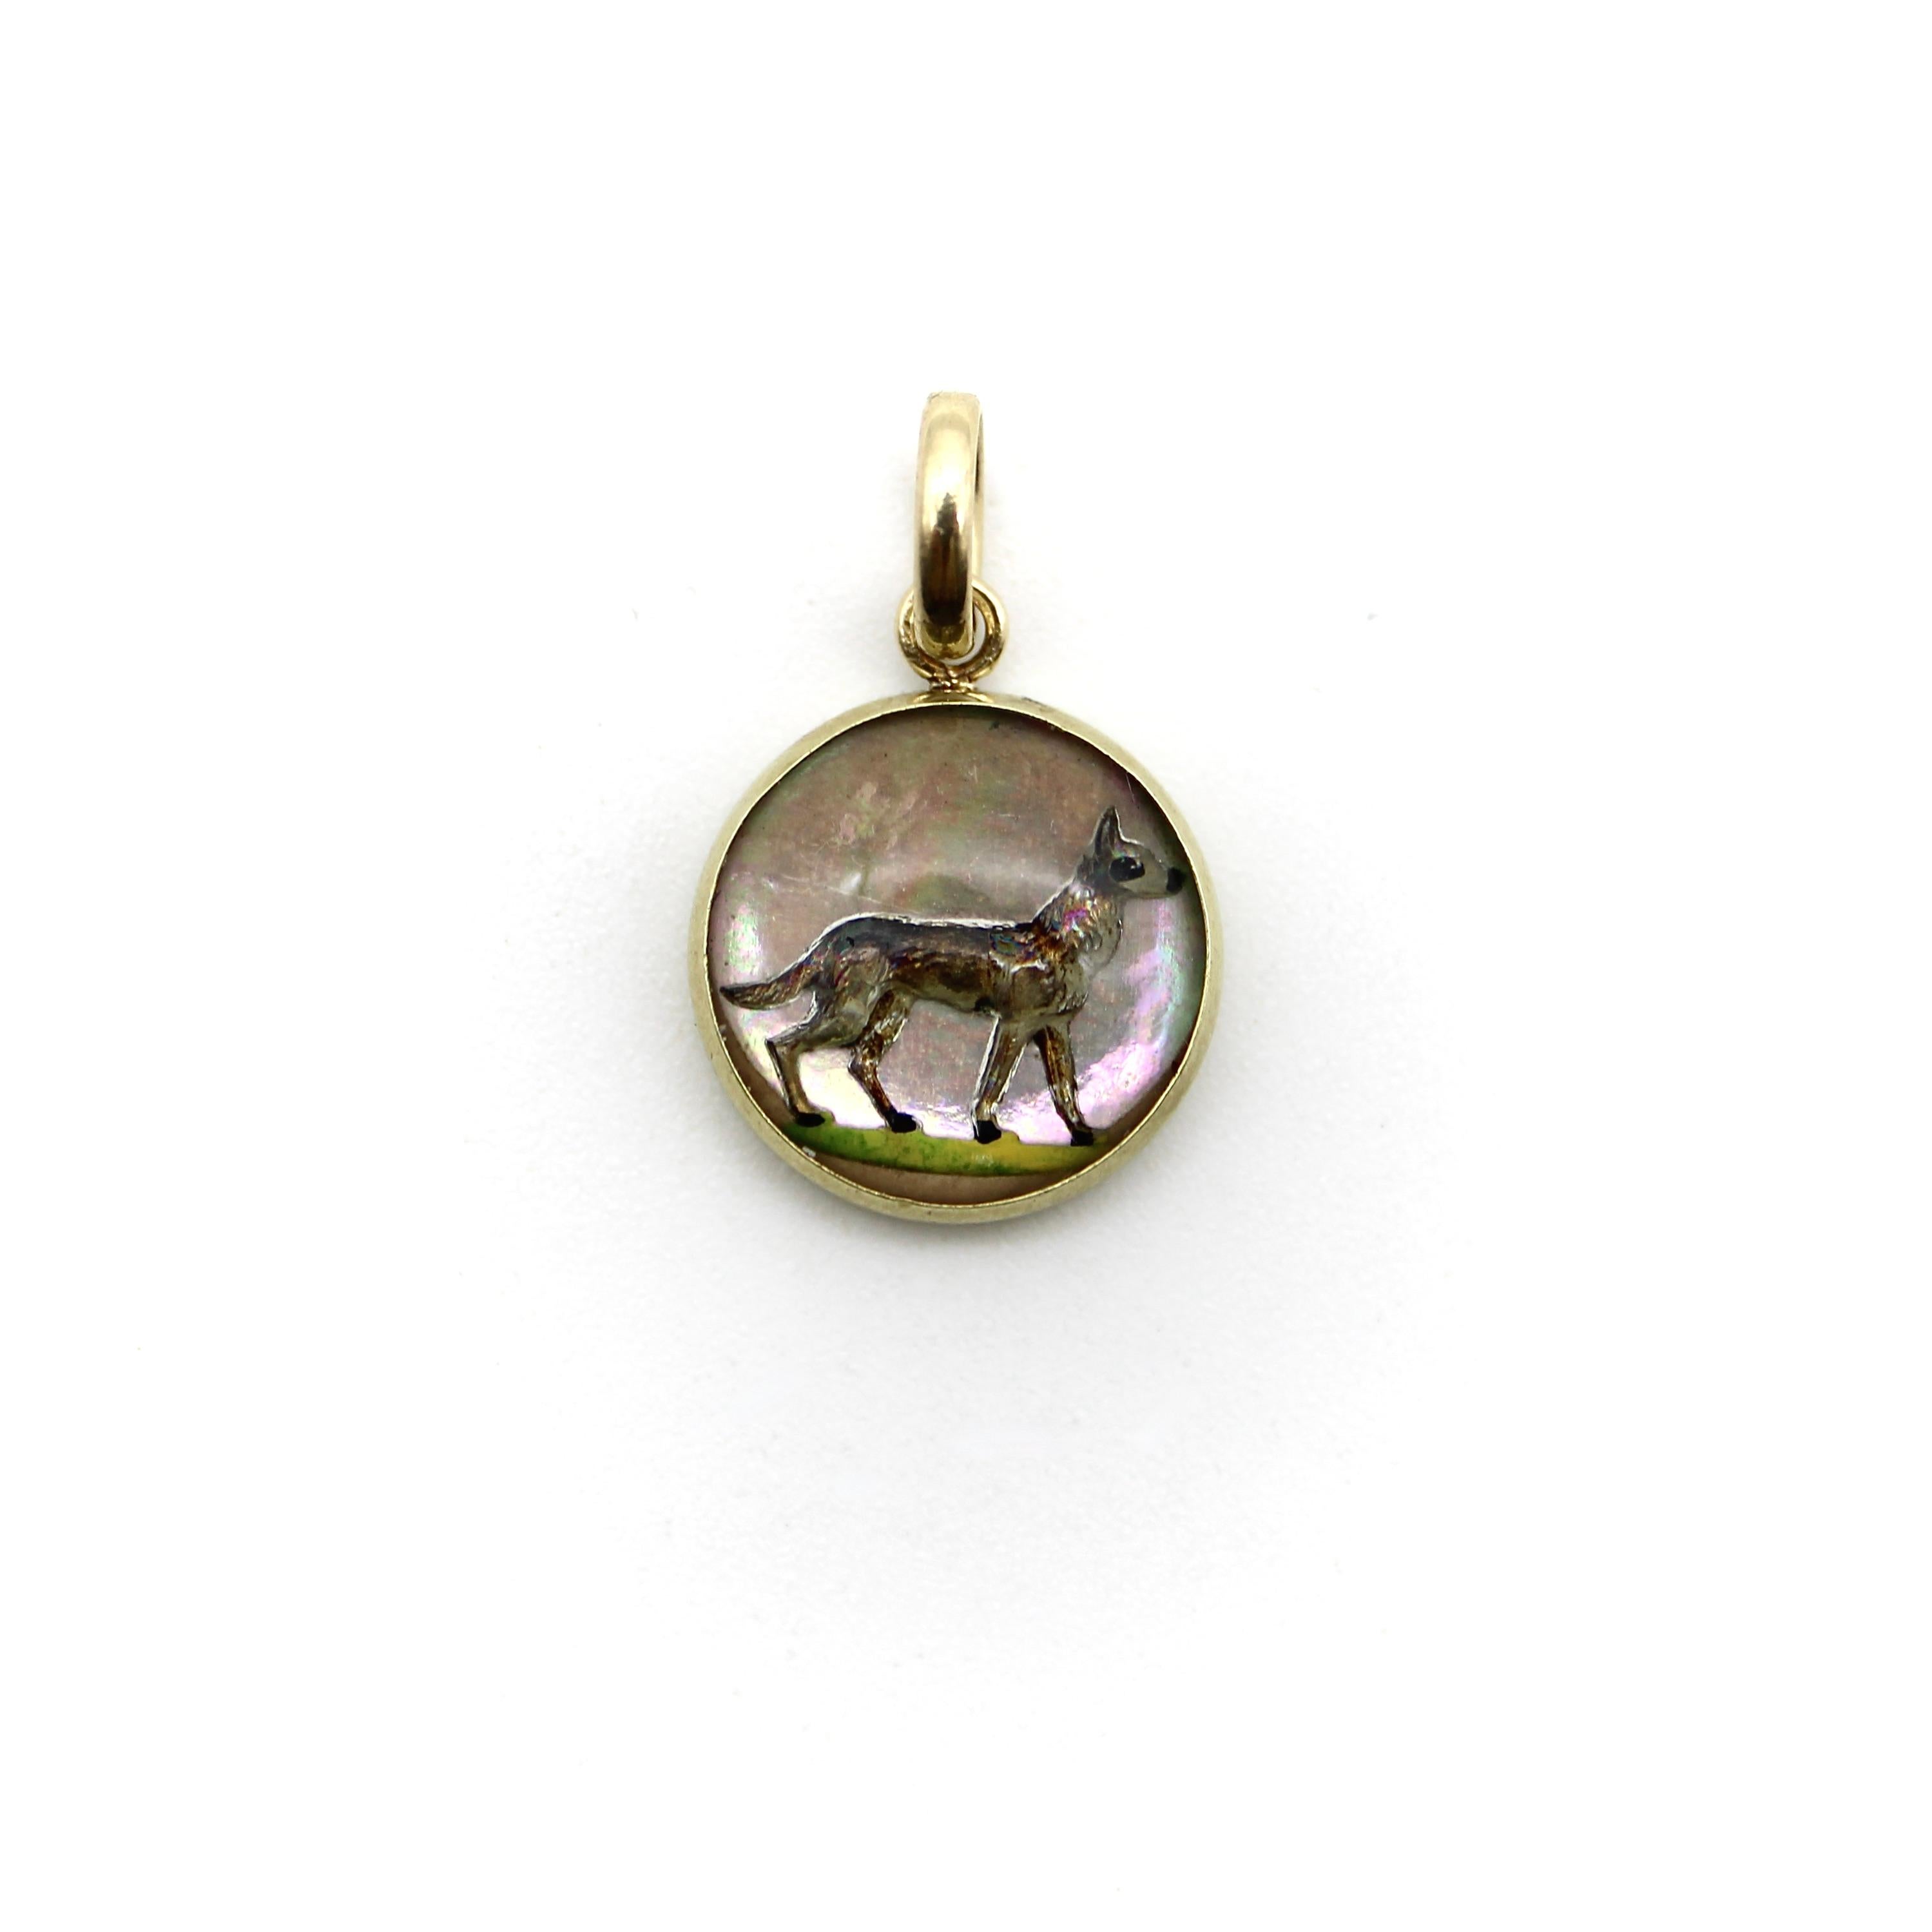 This circular pendant is cast from glass, with a dog carved and hand painted to shine through in a lively, three-dimensional effect. The dog is similar to a German Shepard, and it stands on a patch of green grass that adds cheerful color to the